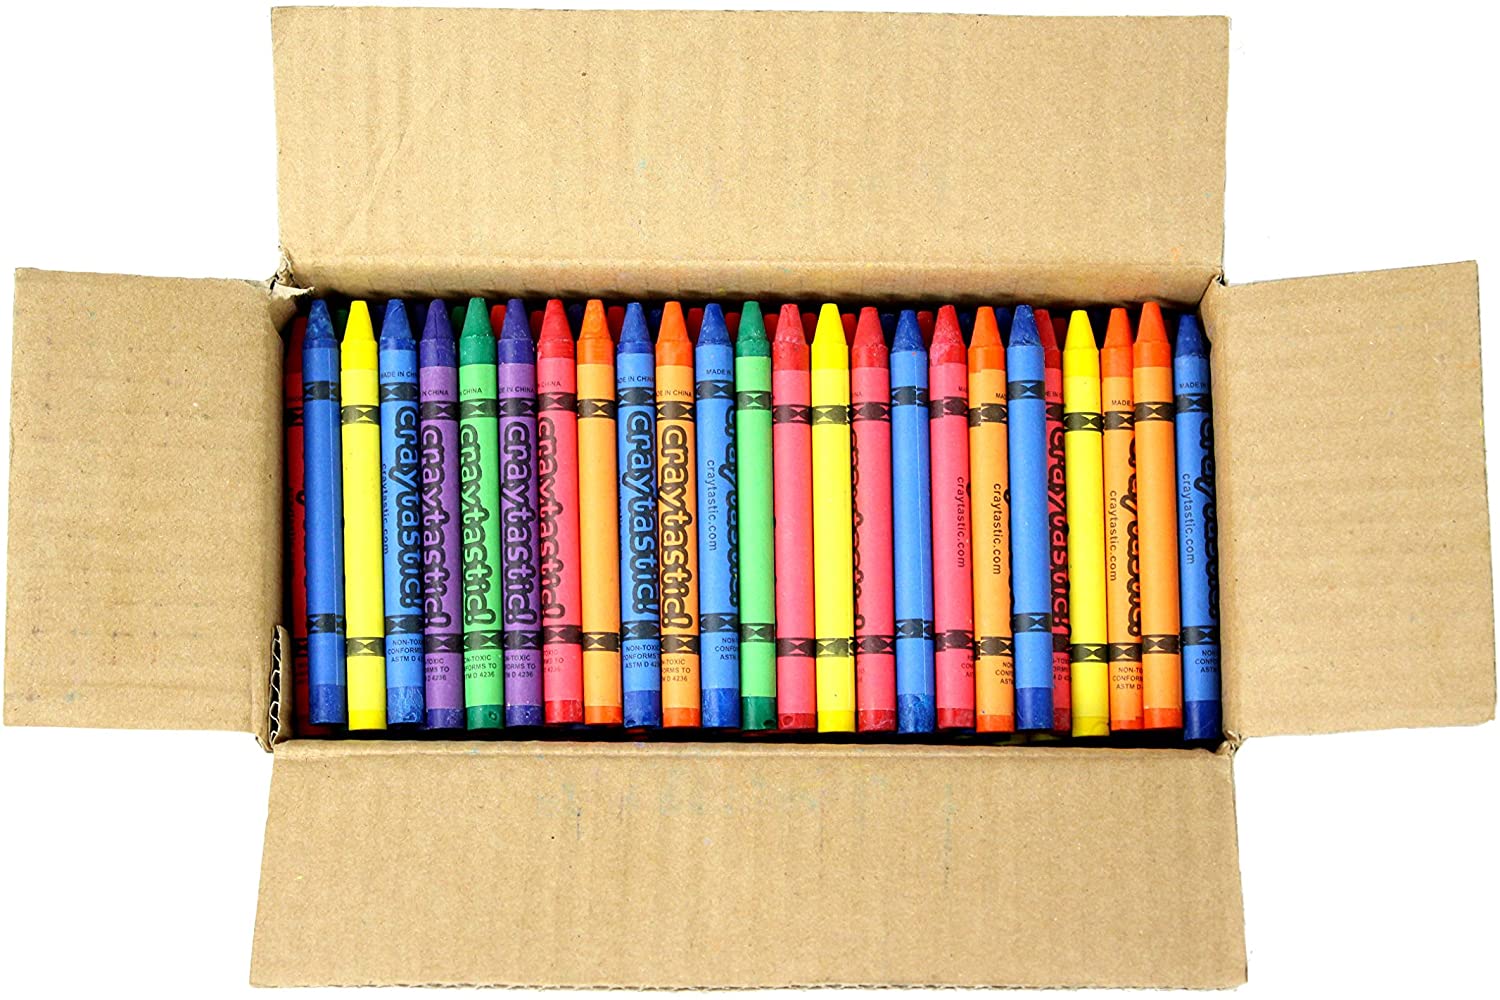 Unwrapped Crayons 